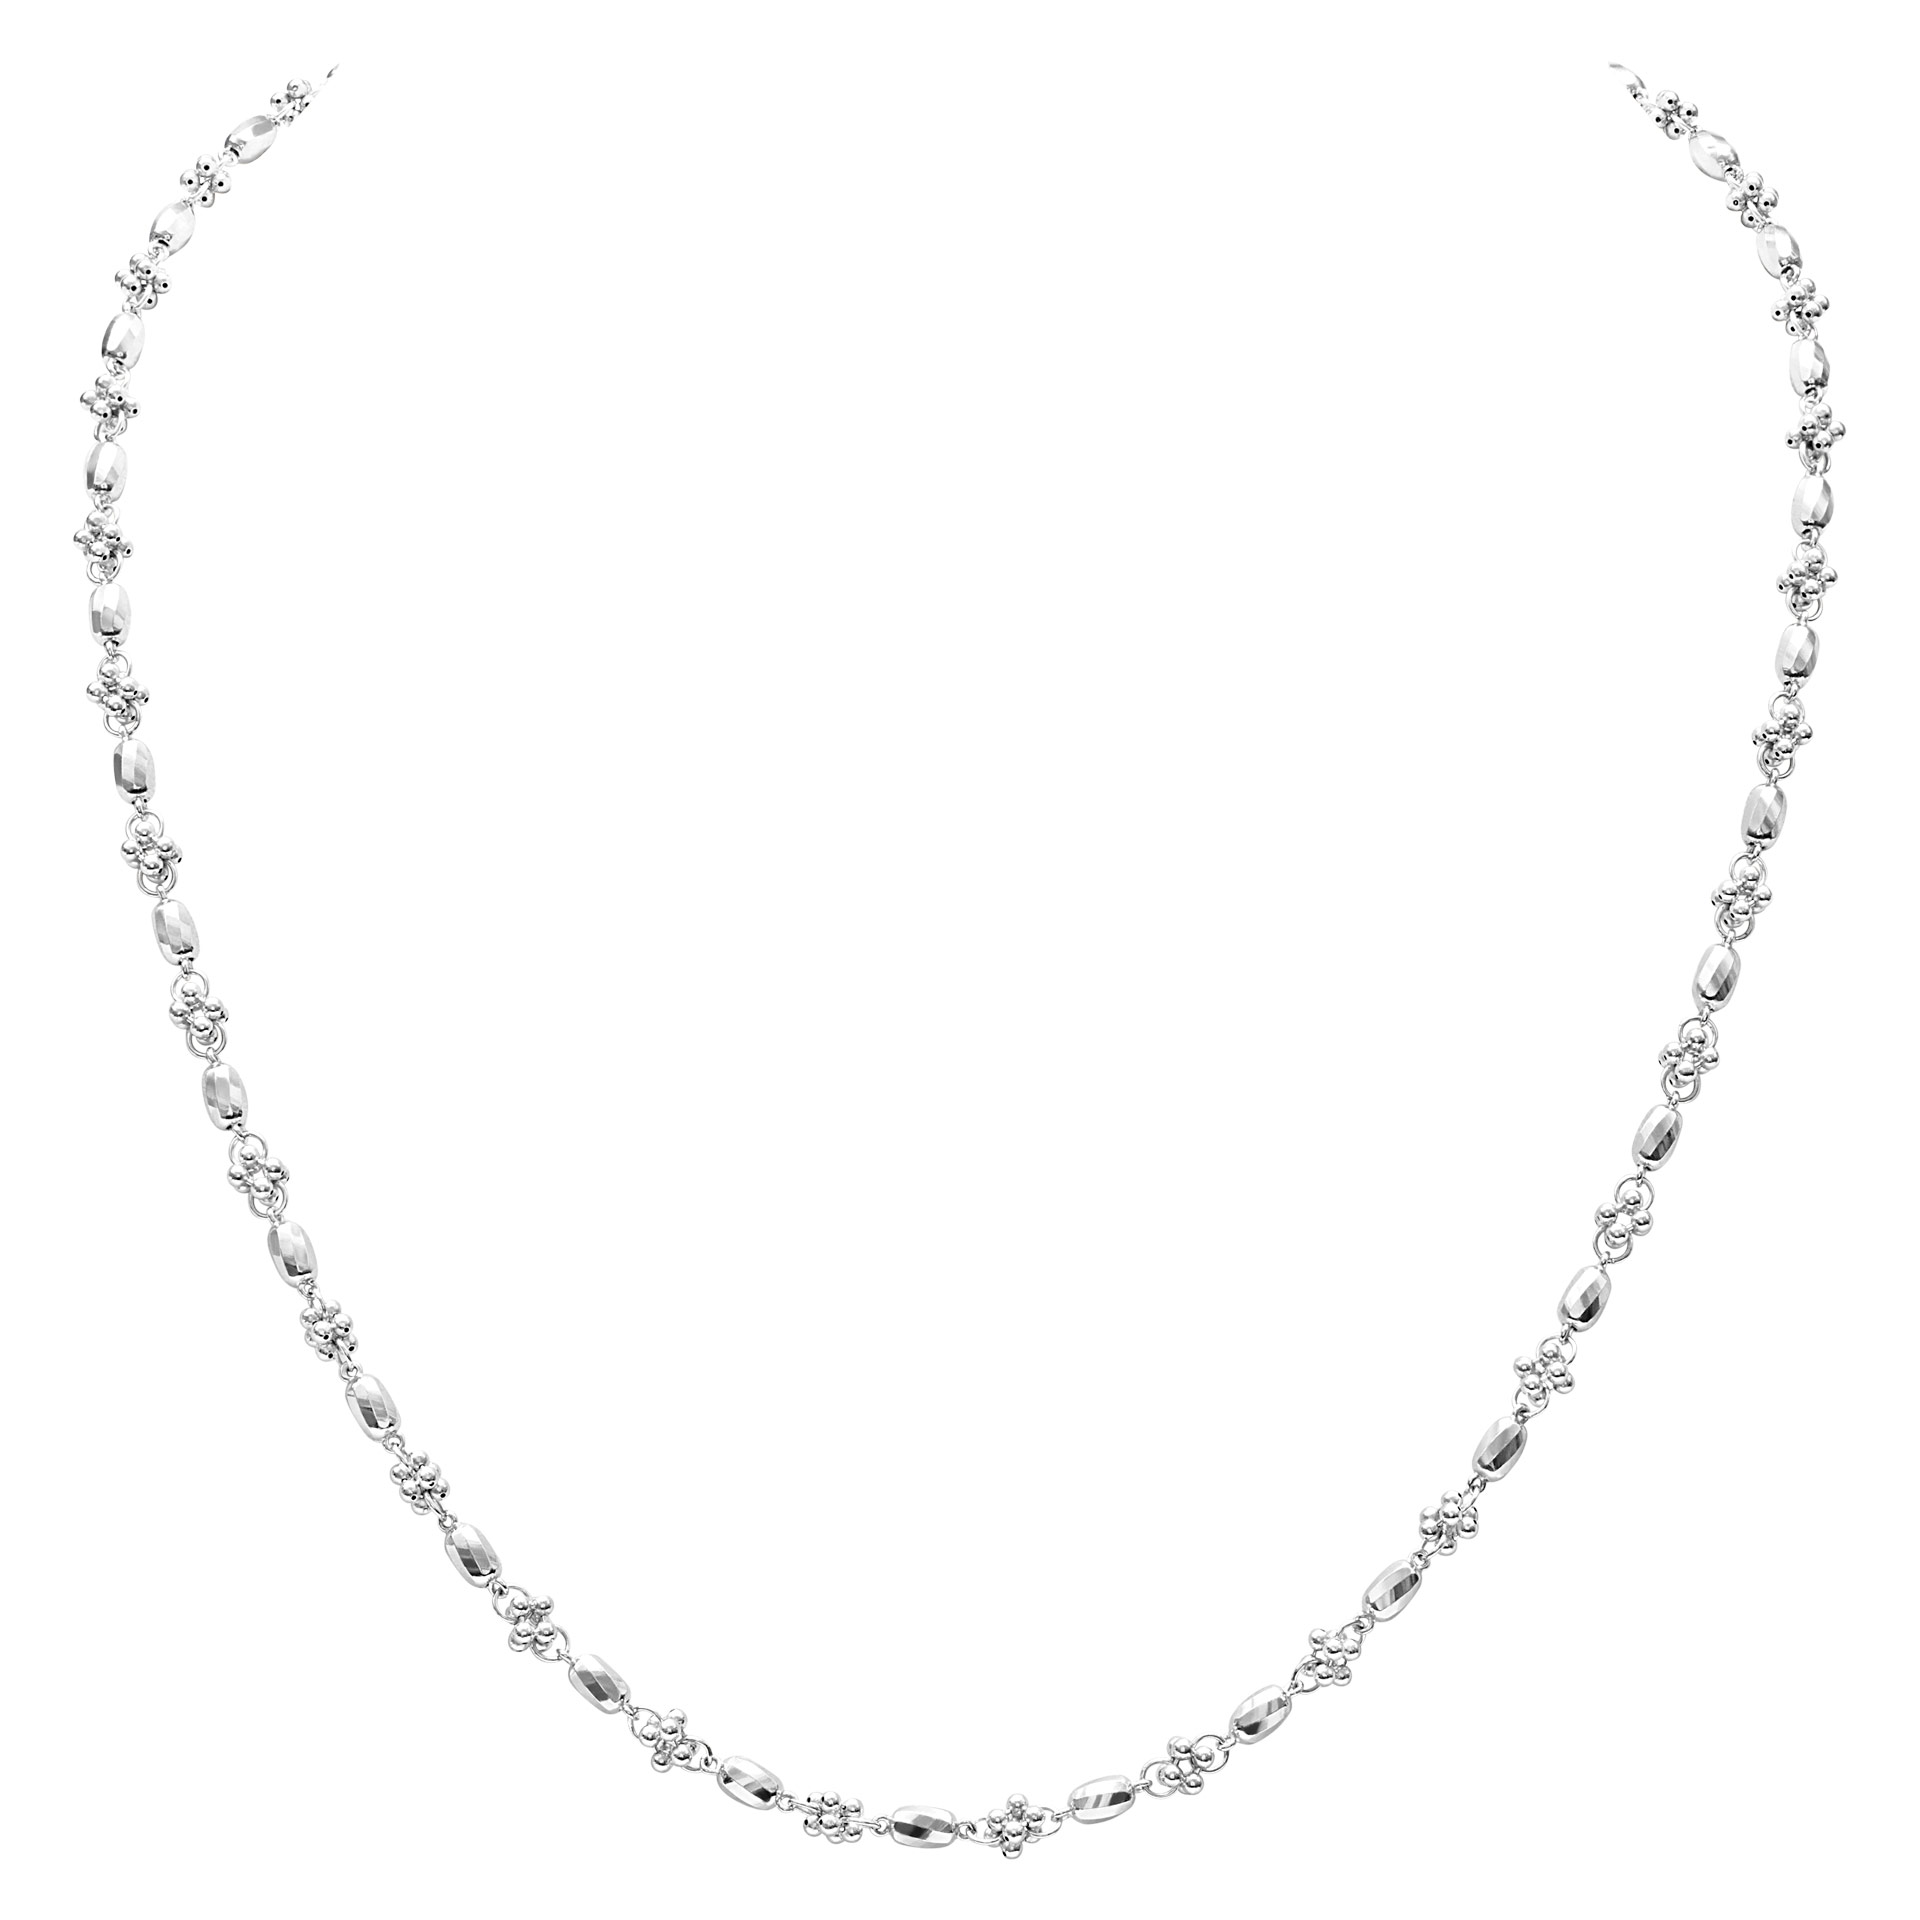 Faceted cluster necklace in platinum